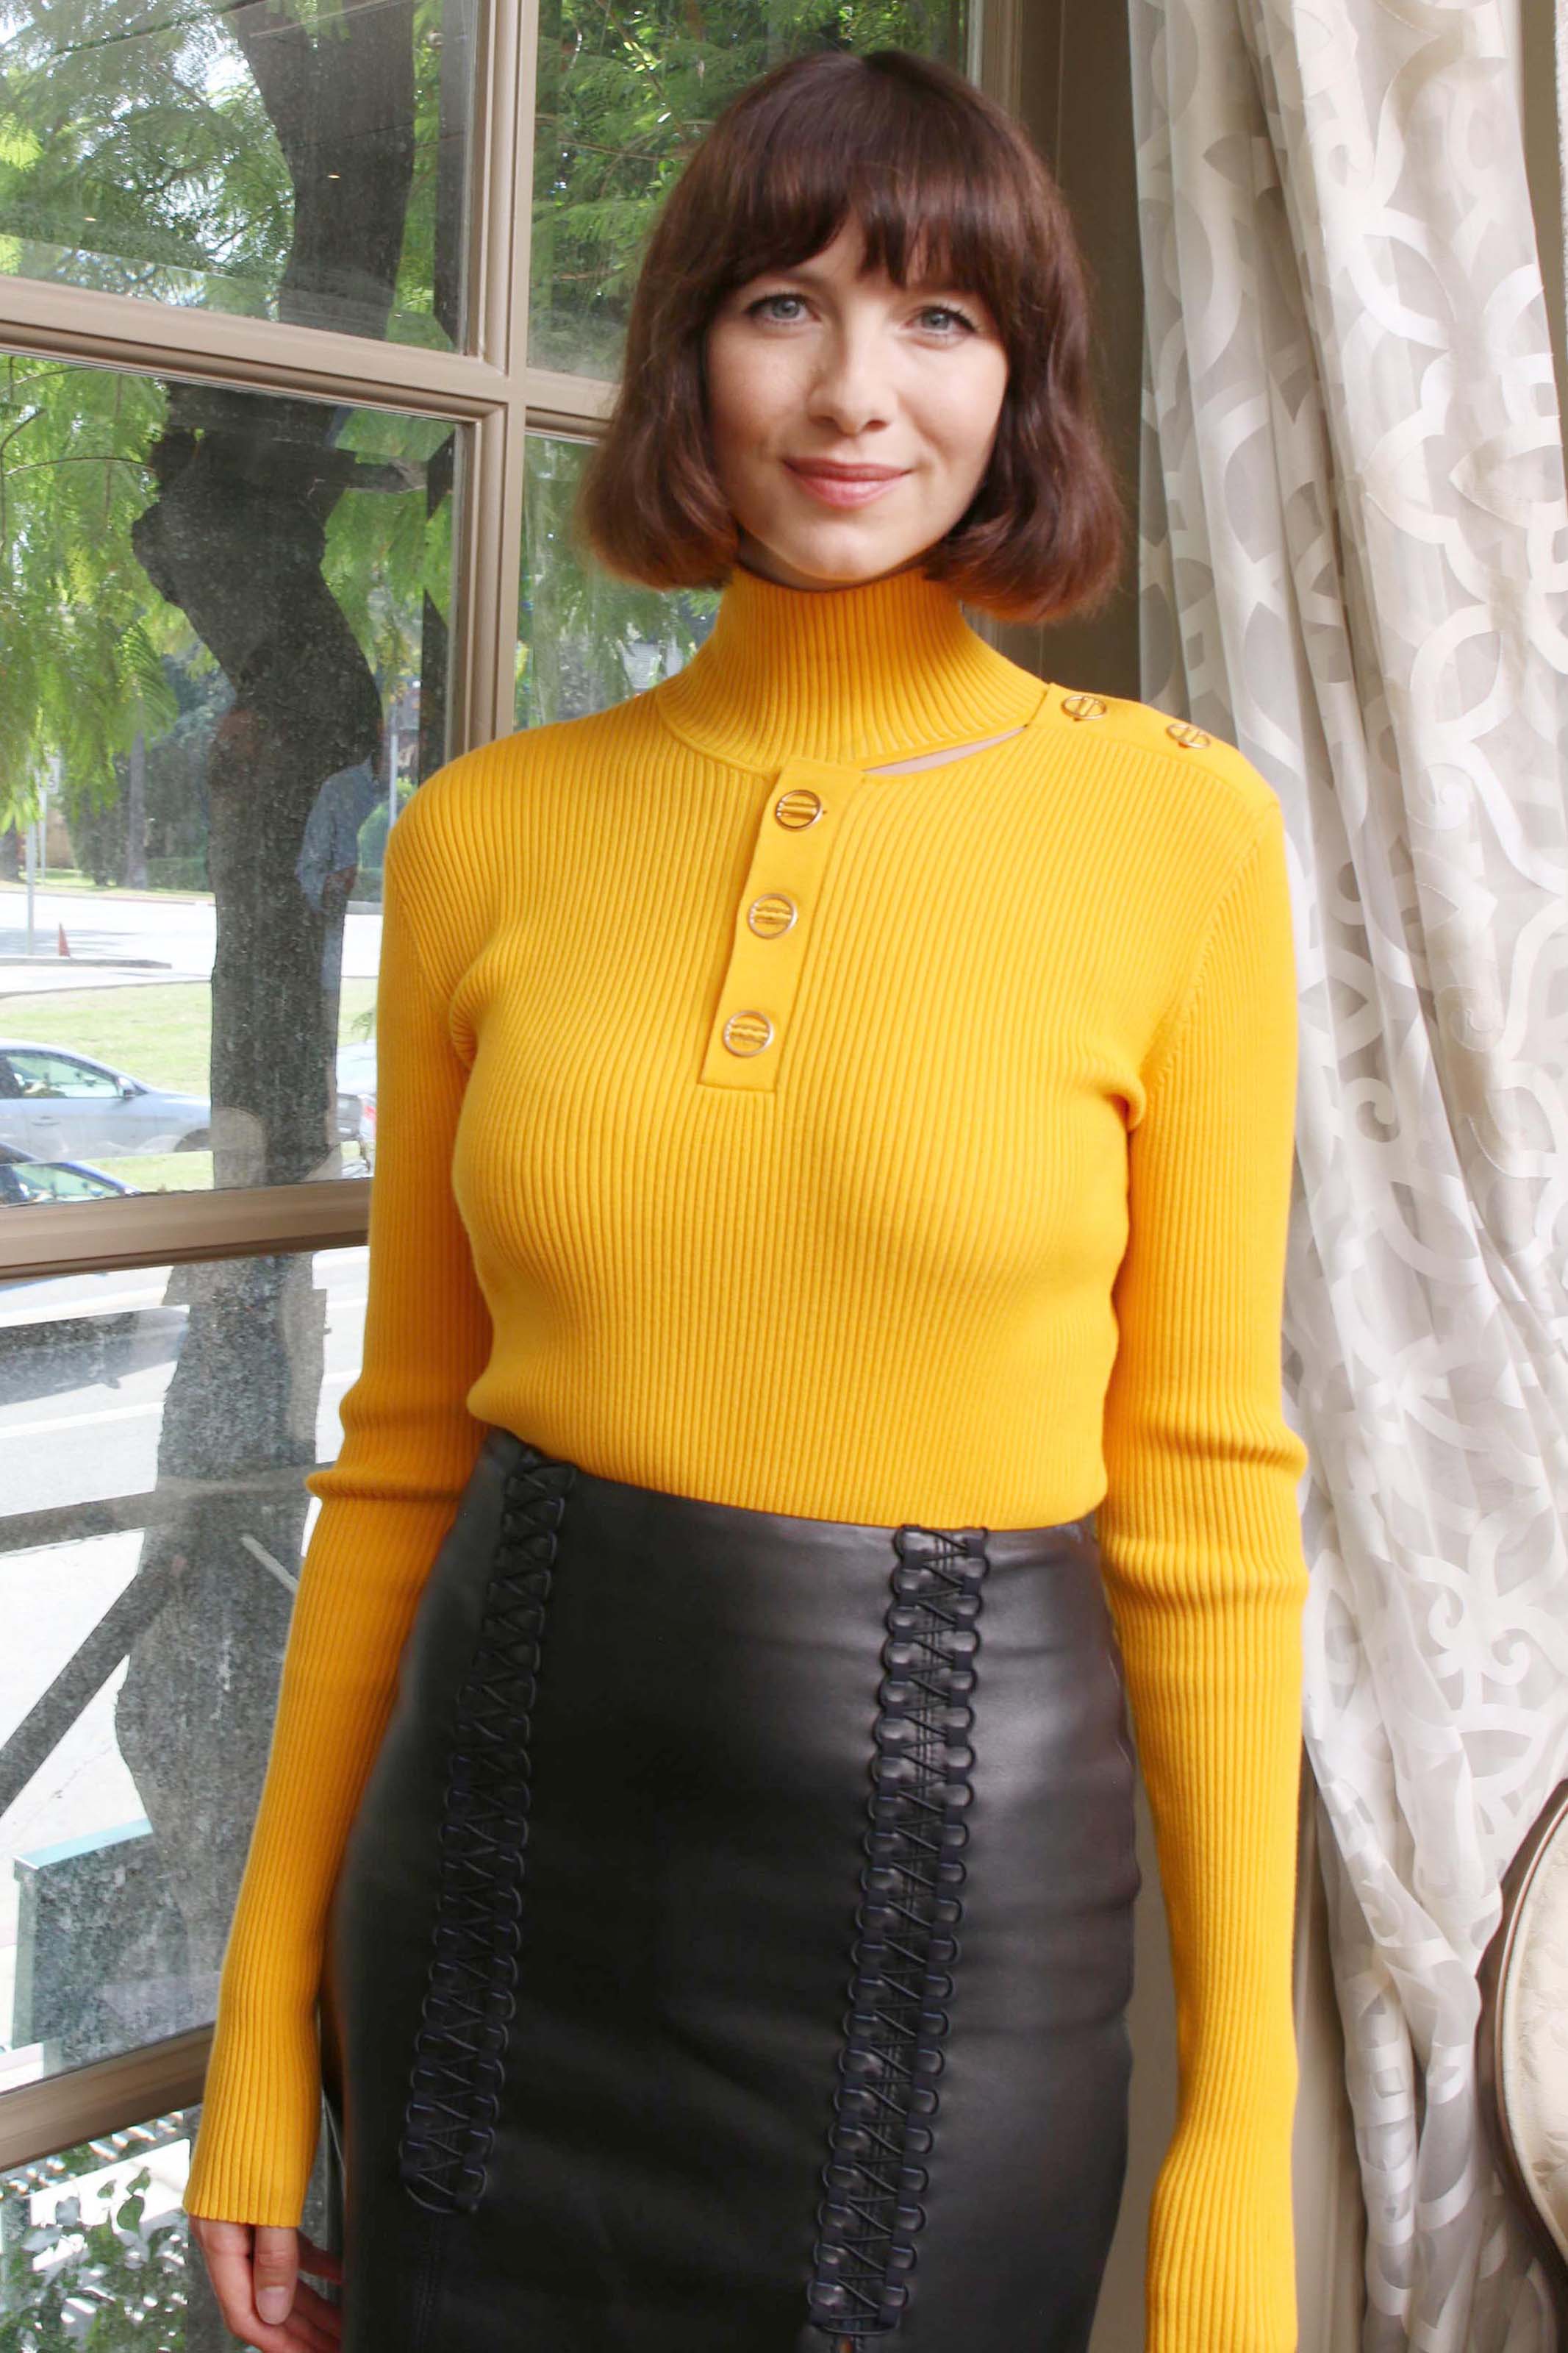 Caitriona Balfe attends Press Conference